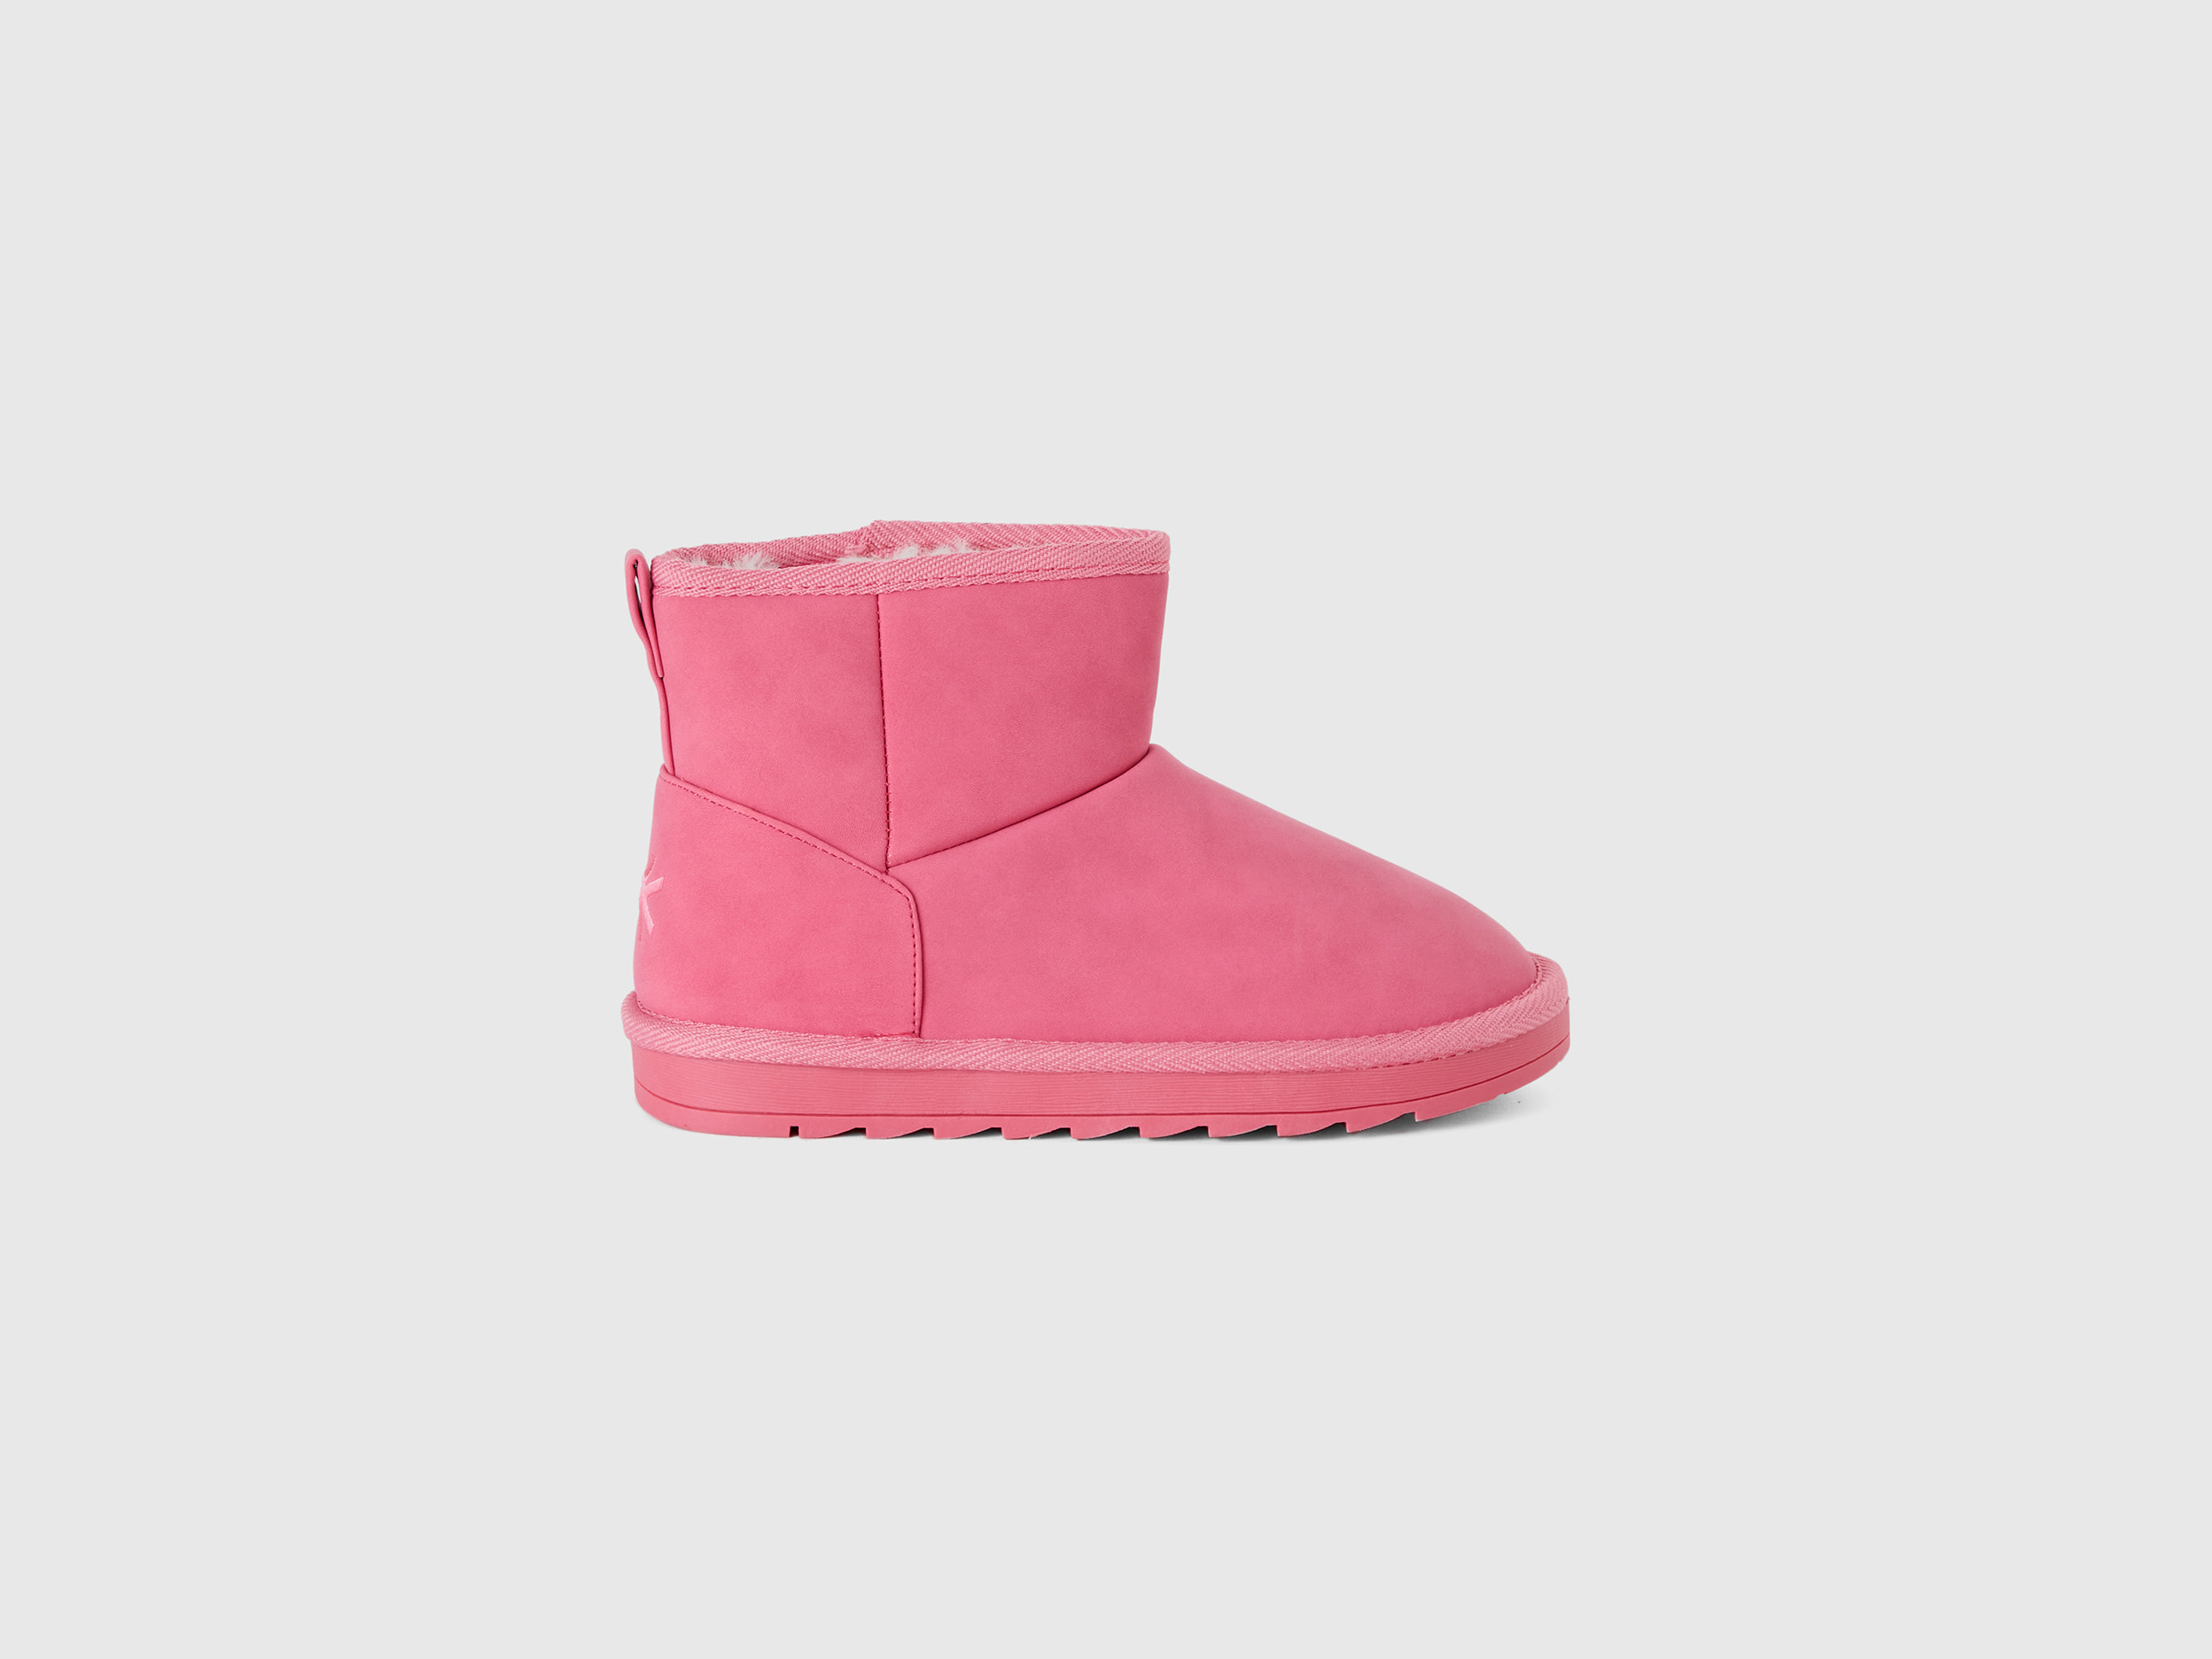 Benetton, Ankle Boots In Imitation Leather, size 5Y, Pink, Kids